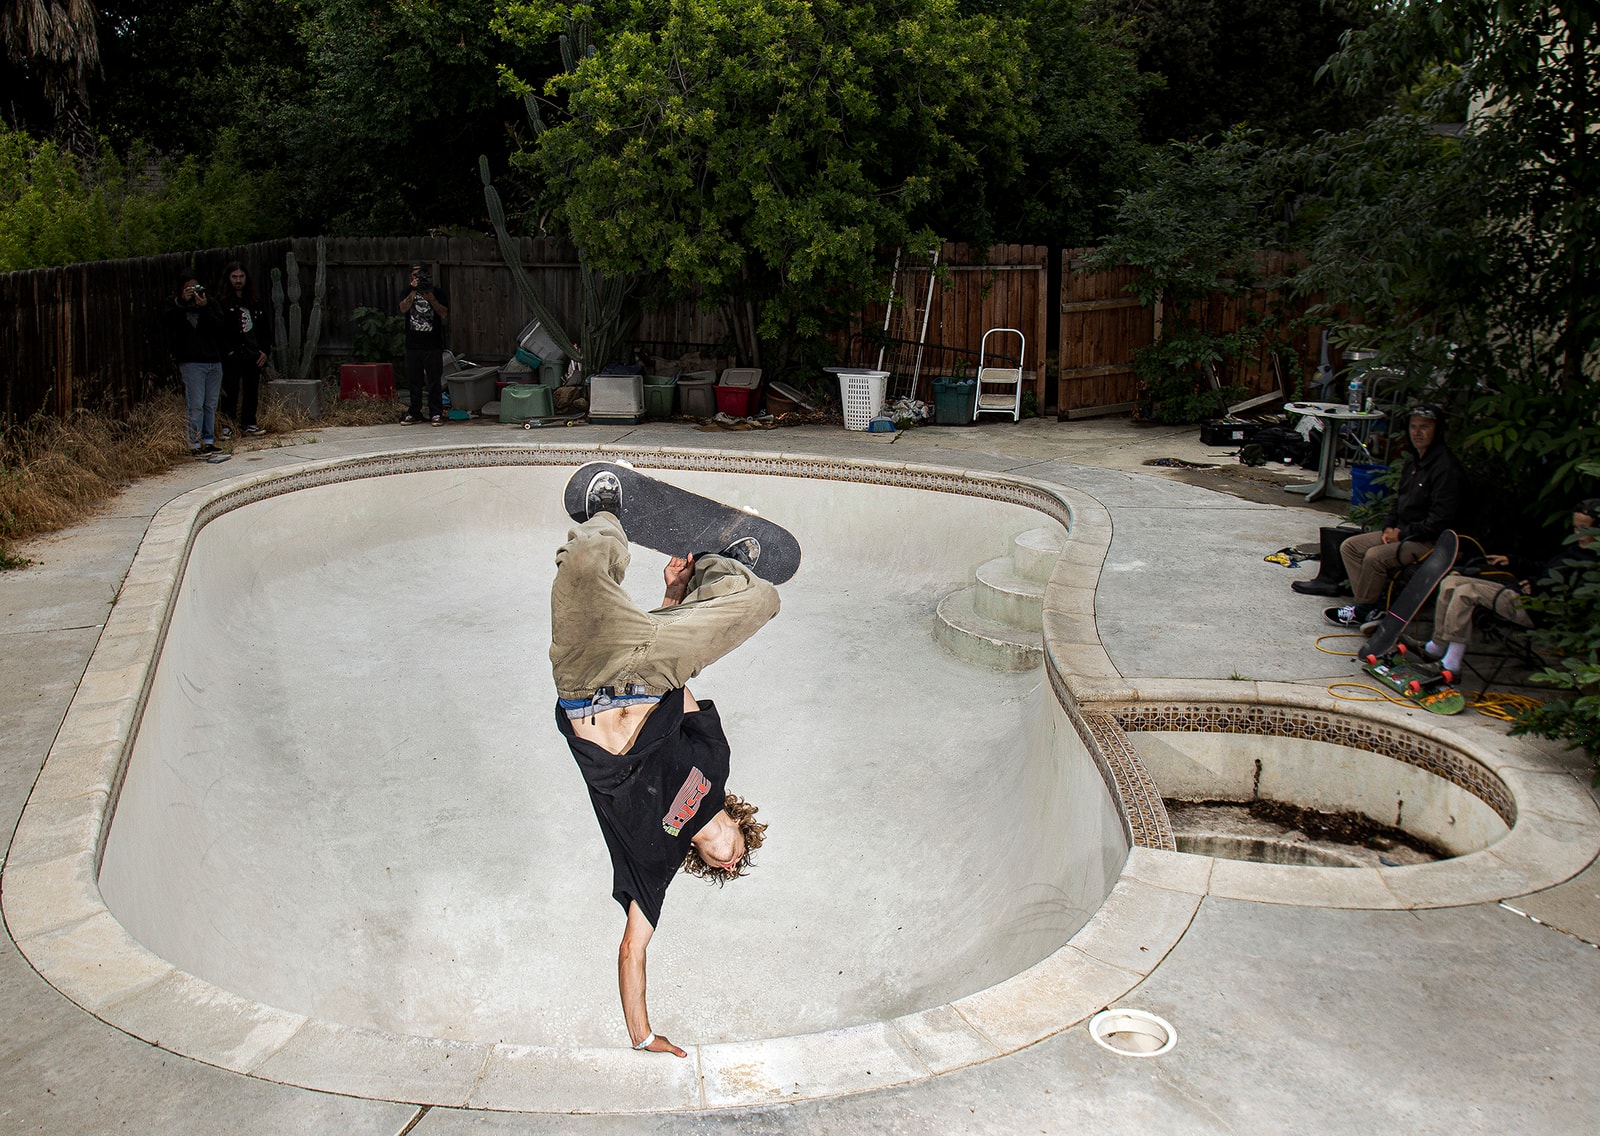 20 QUESTIONS WITH JESSE LINDLOFF—PHOTOS BY DAVE SWIFT